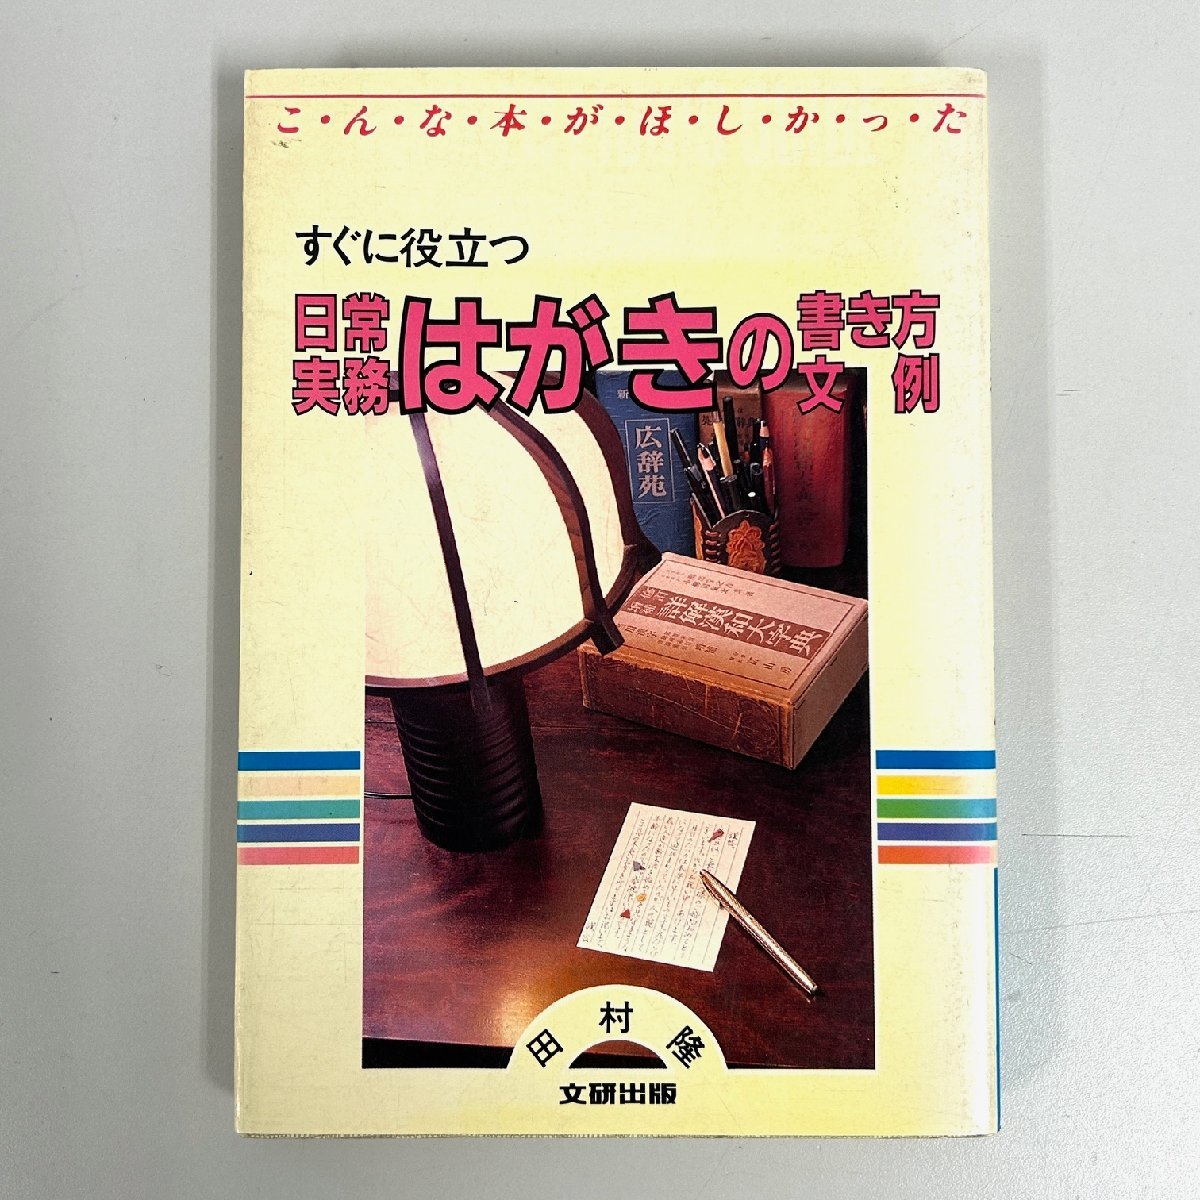 [80]1 jpy ~ short . speech . work compilation ..*... speech real example compilation immediately position be established everyday business practice postcard. manner of writing writing example . summarize 3 pcs. used book